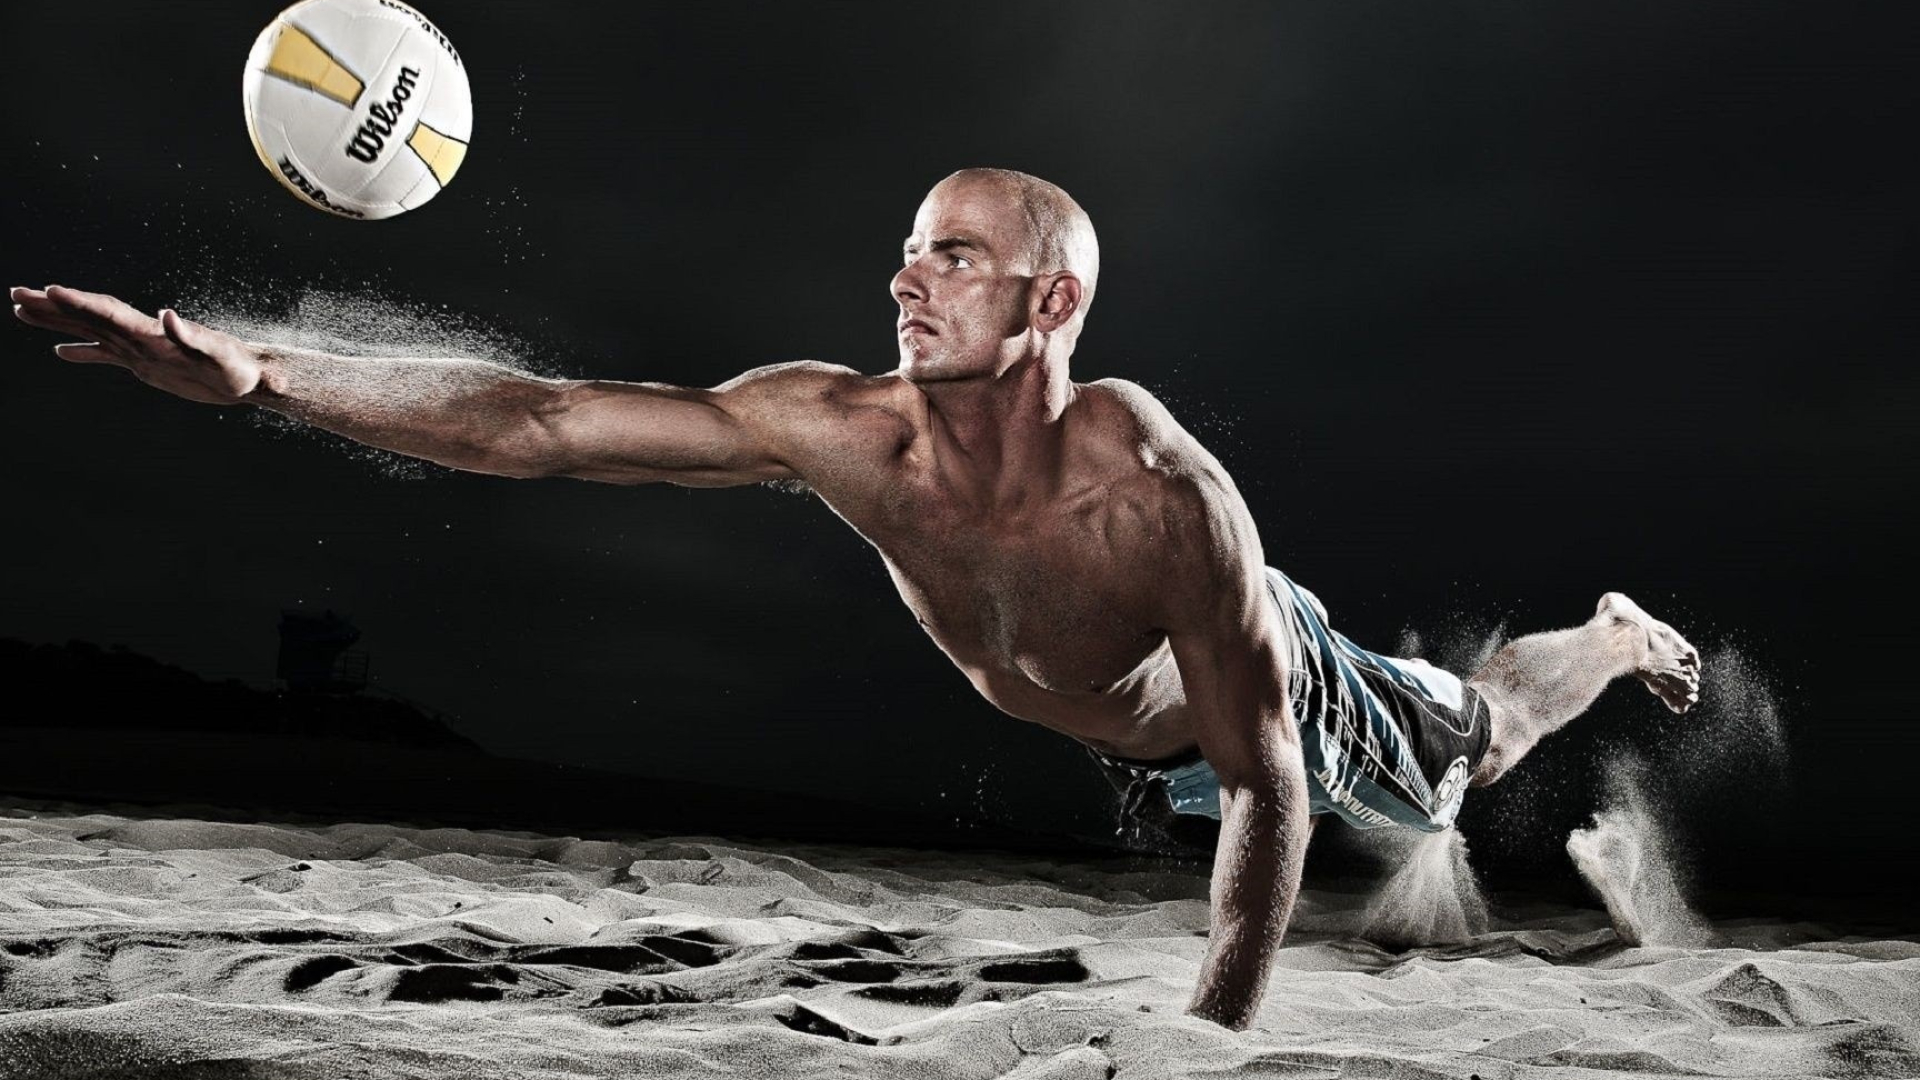 Volleyball, Sports wallpapers, Dynamic action, Volleyball players, 1920x1080 Full HD Desktop